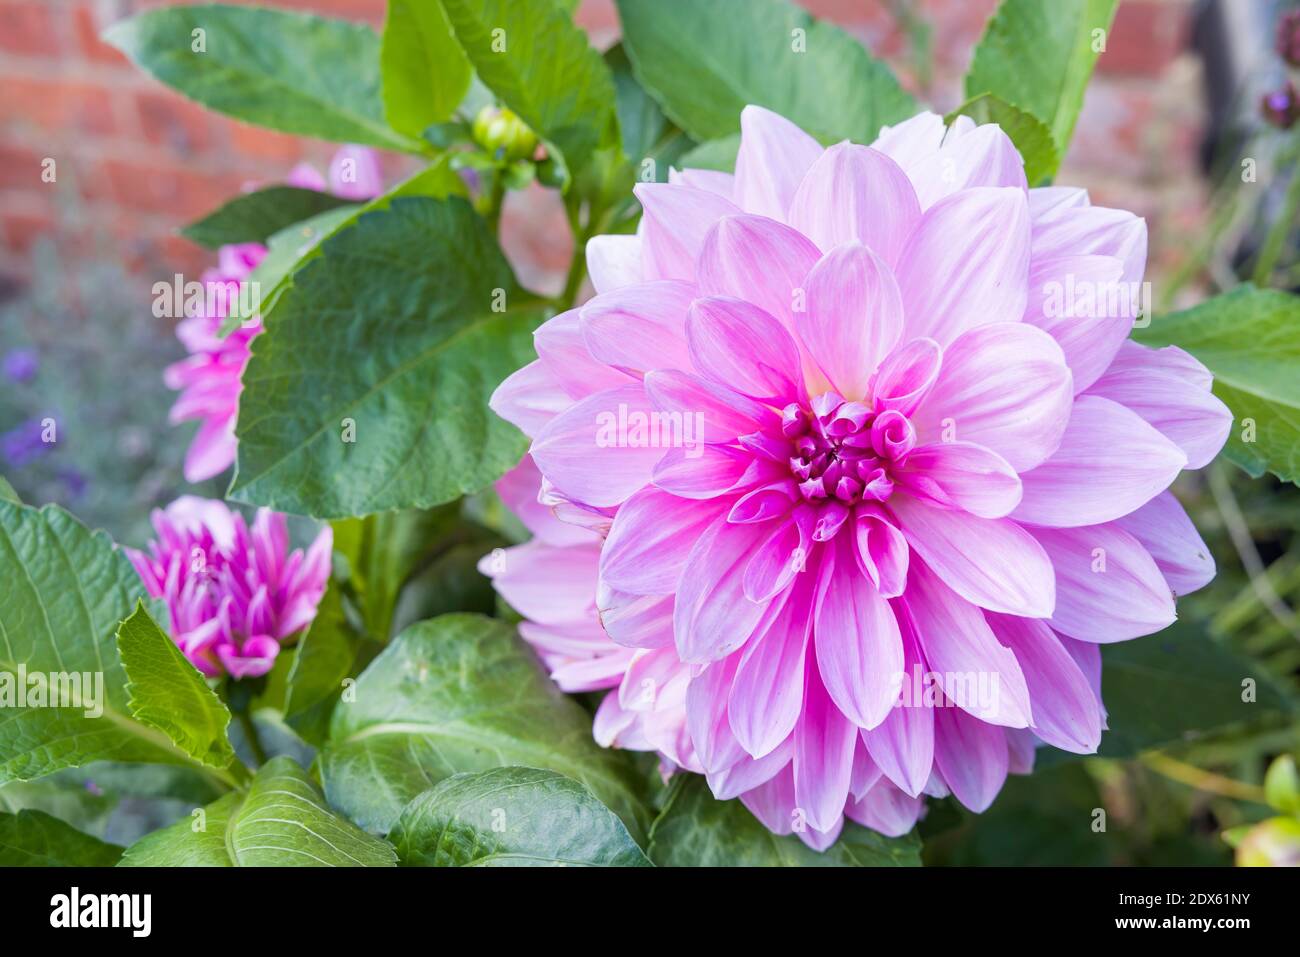 Dahlias growing in a garden, UK. Detail of flower and leaves of a dahlia bush Stock Photo